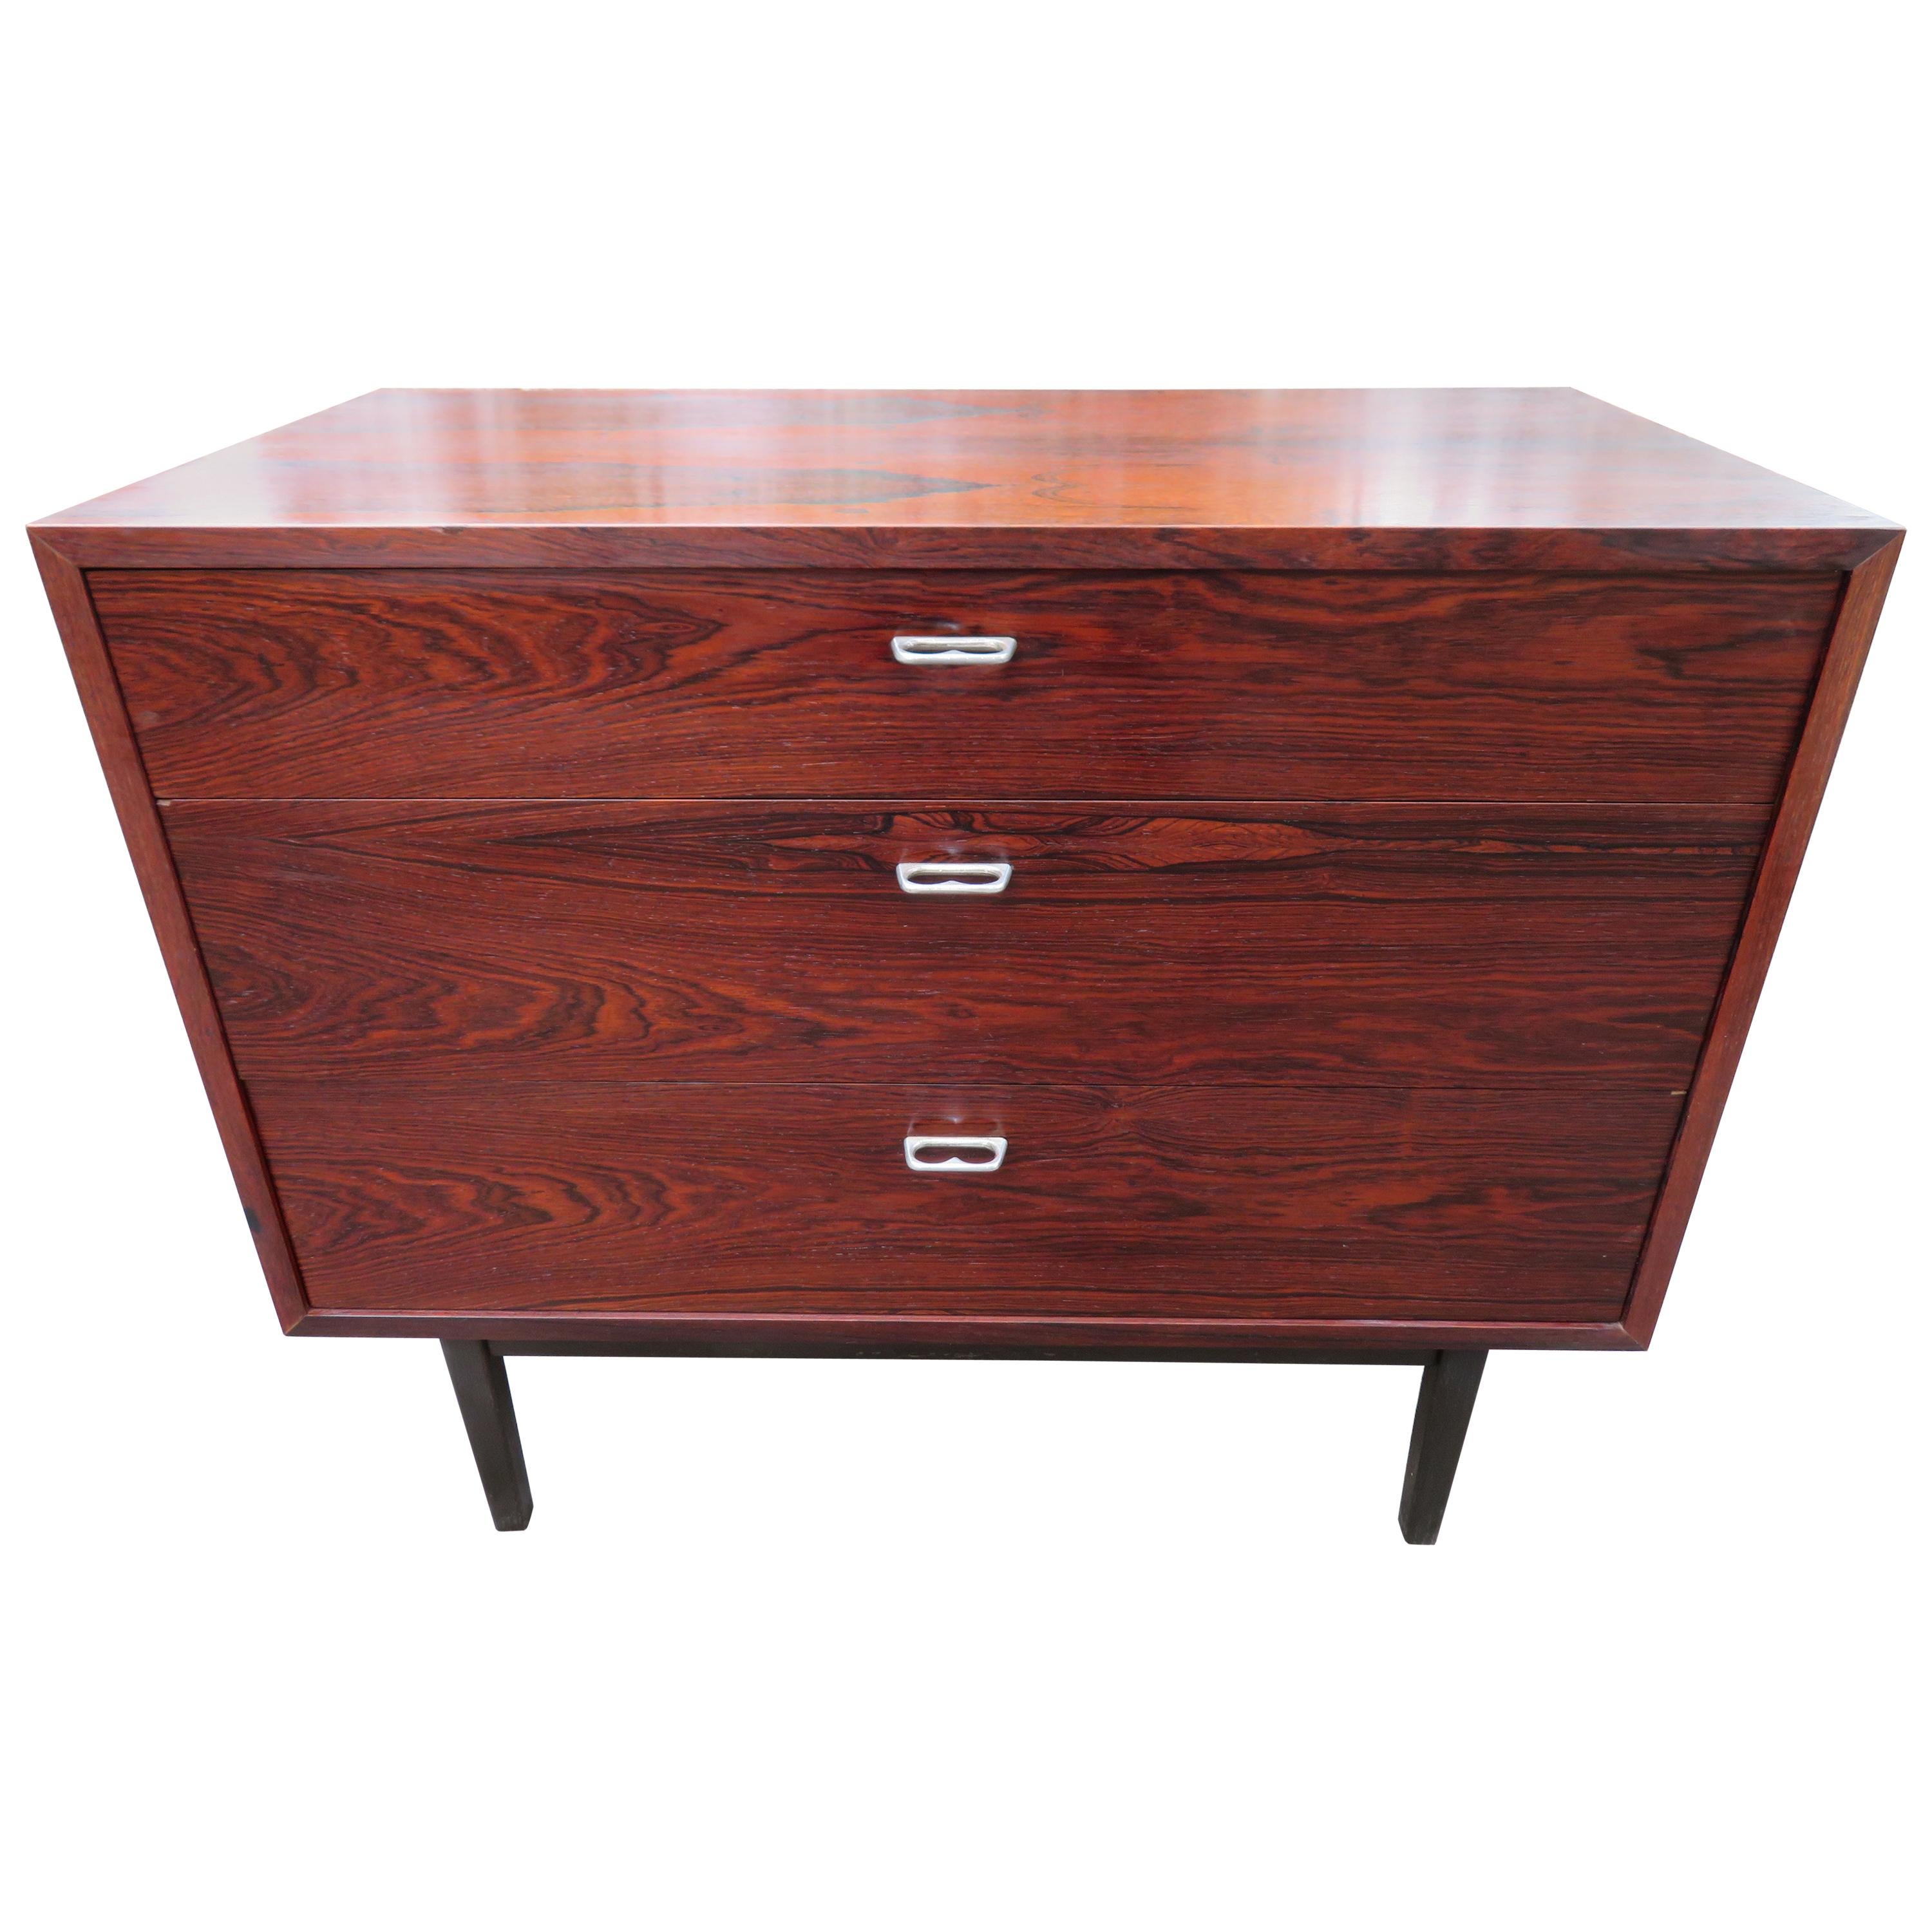 Magnificent Rosewood Jack Cartwright Founders Bachelors Chest of Drawers For Sale